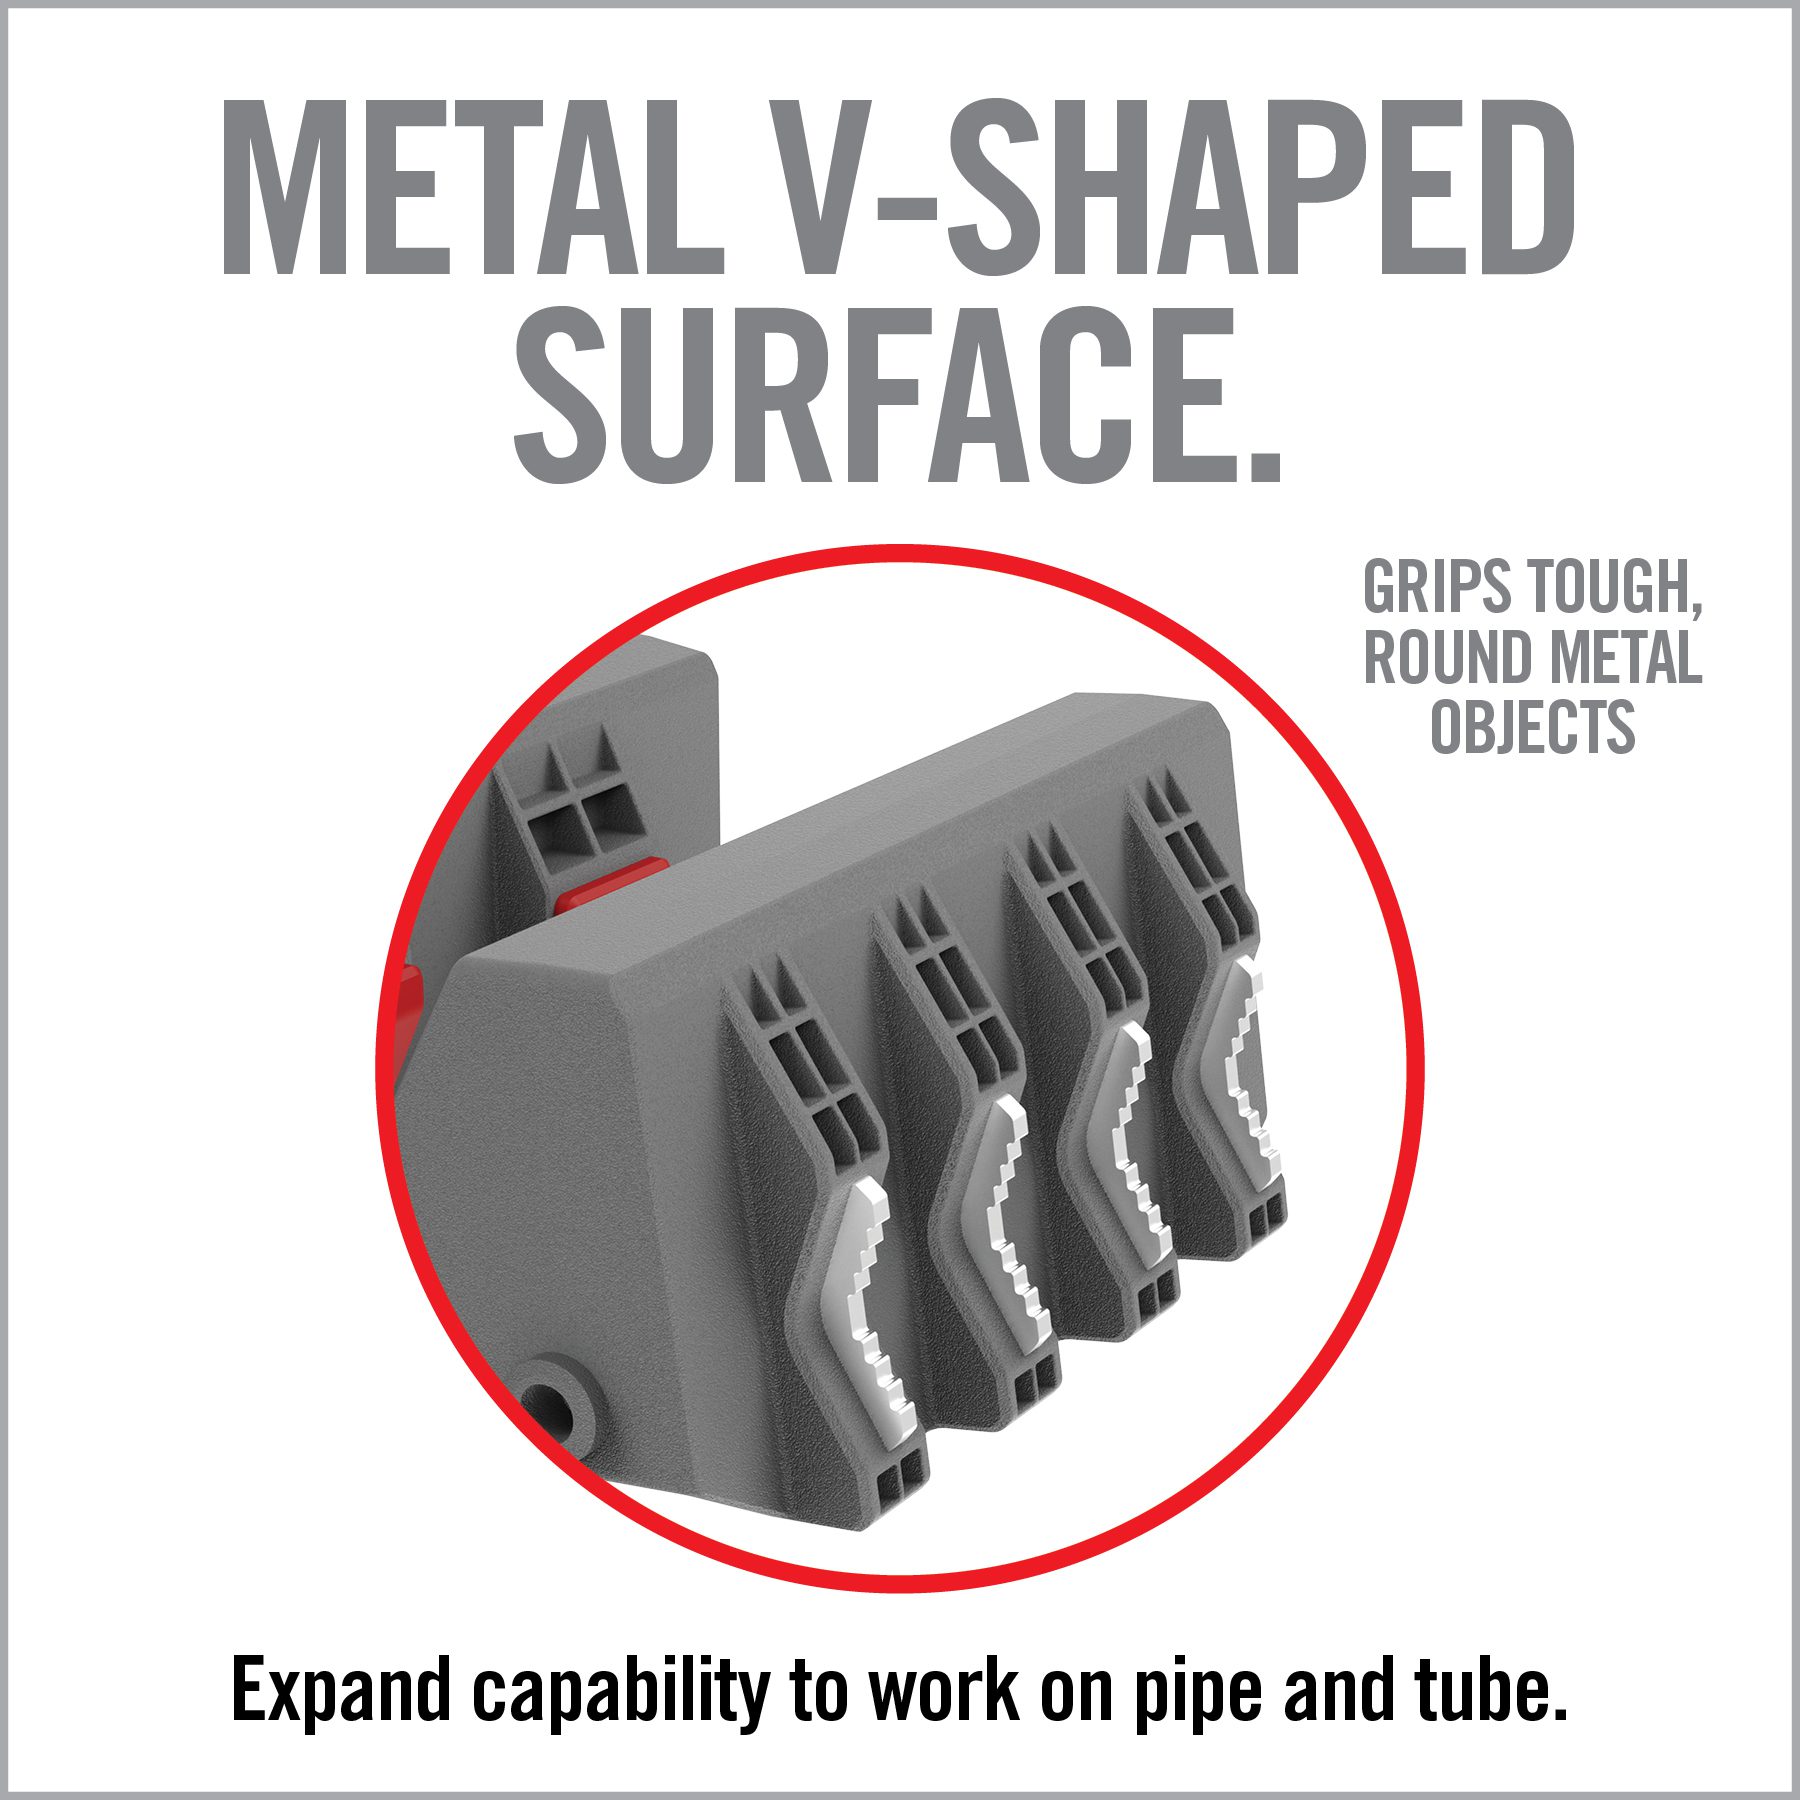 an ad for metal v - shaped surfaces